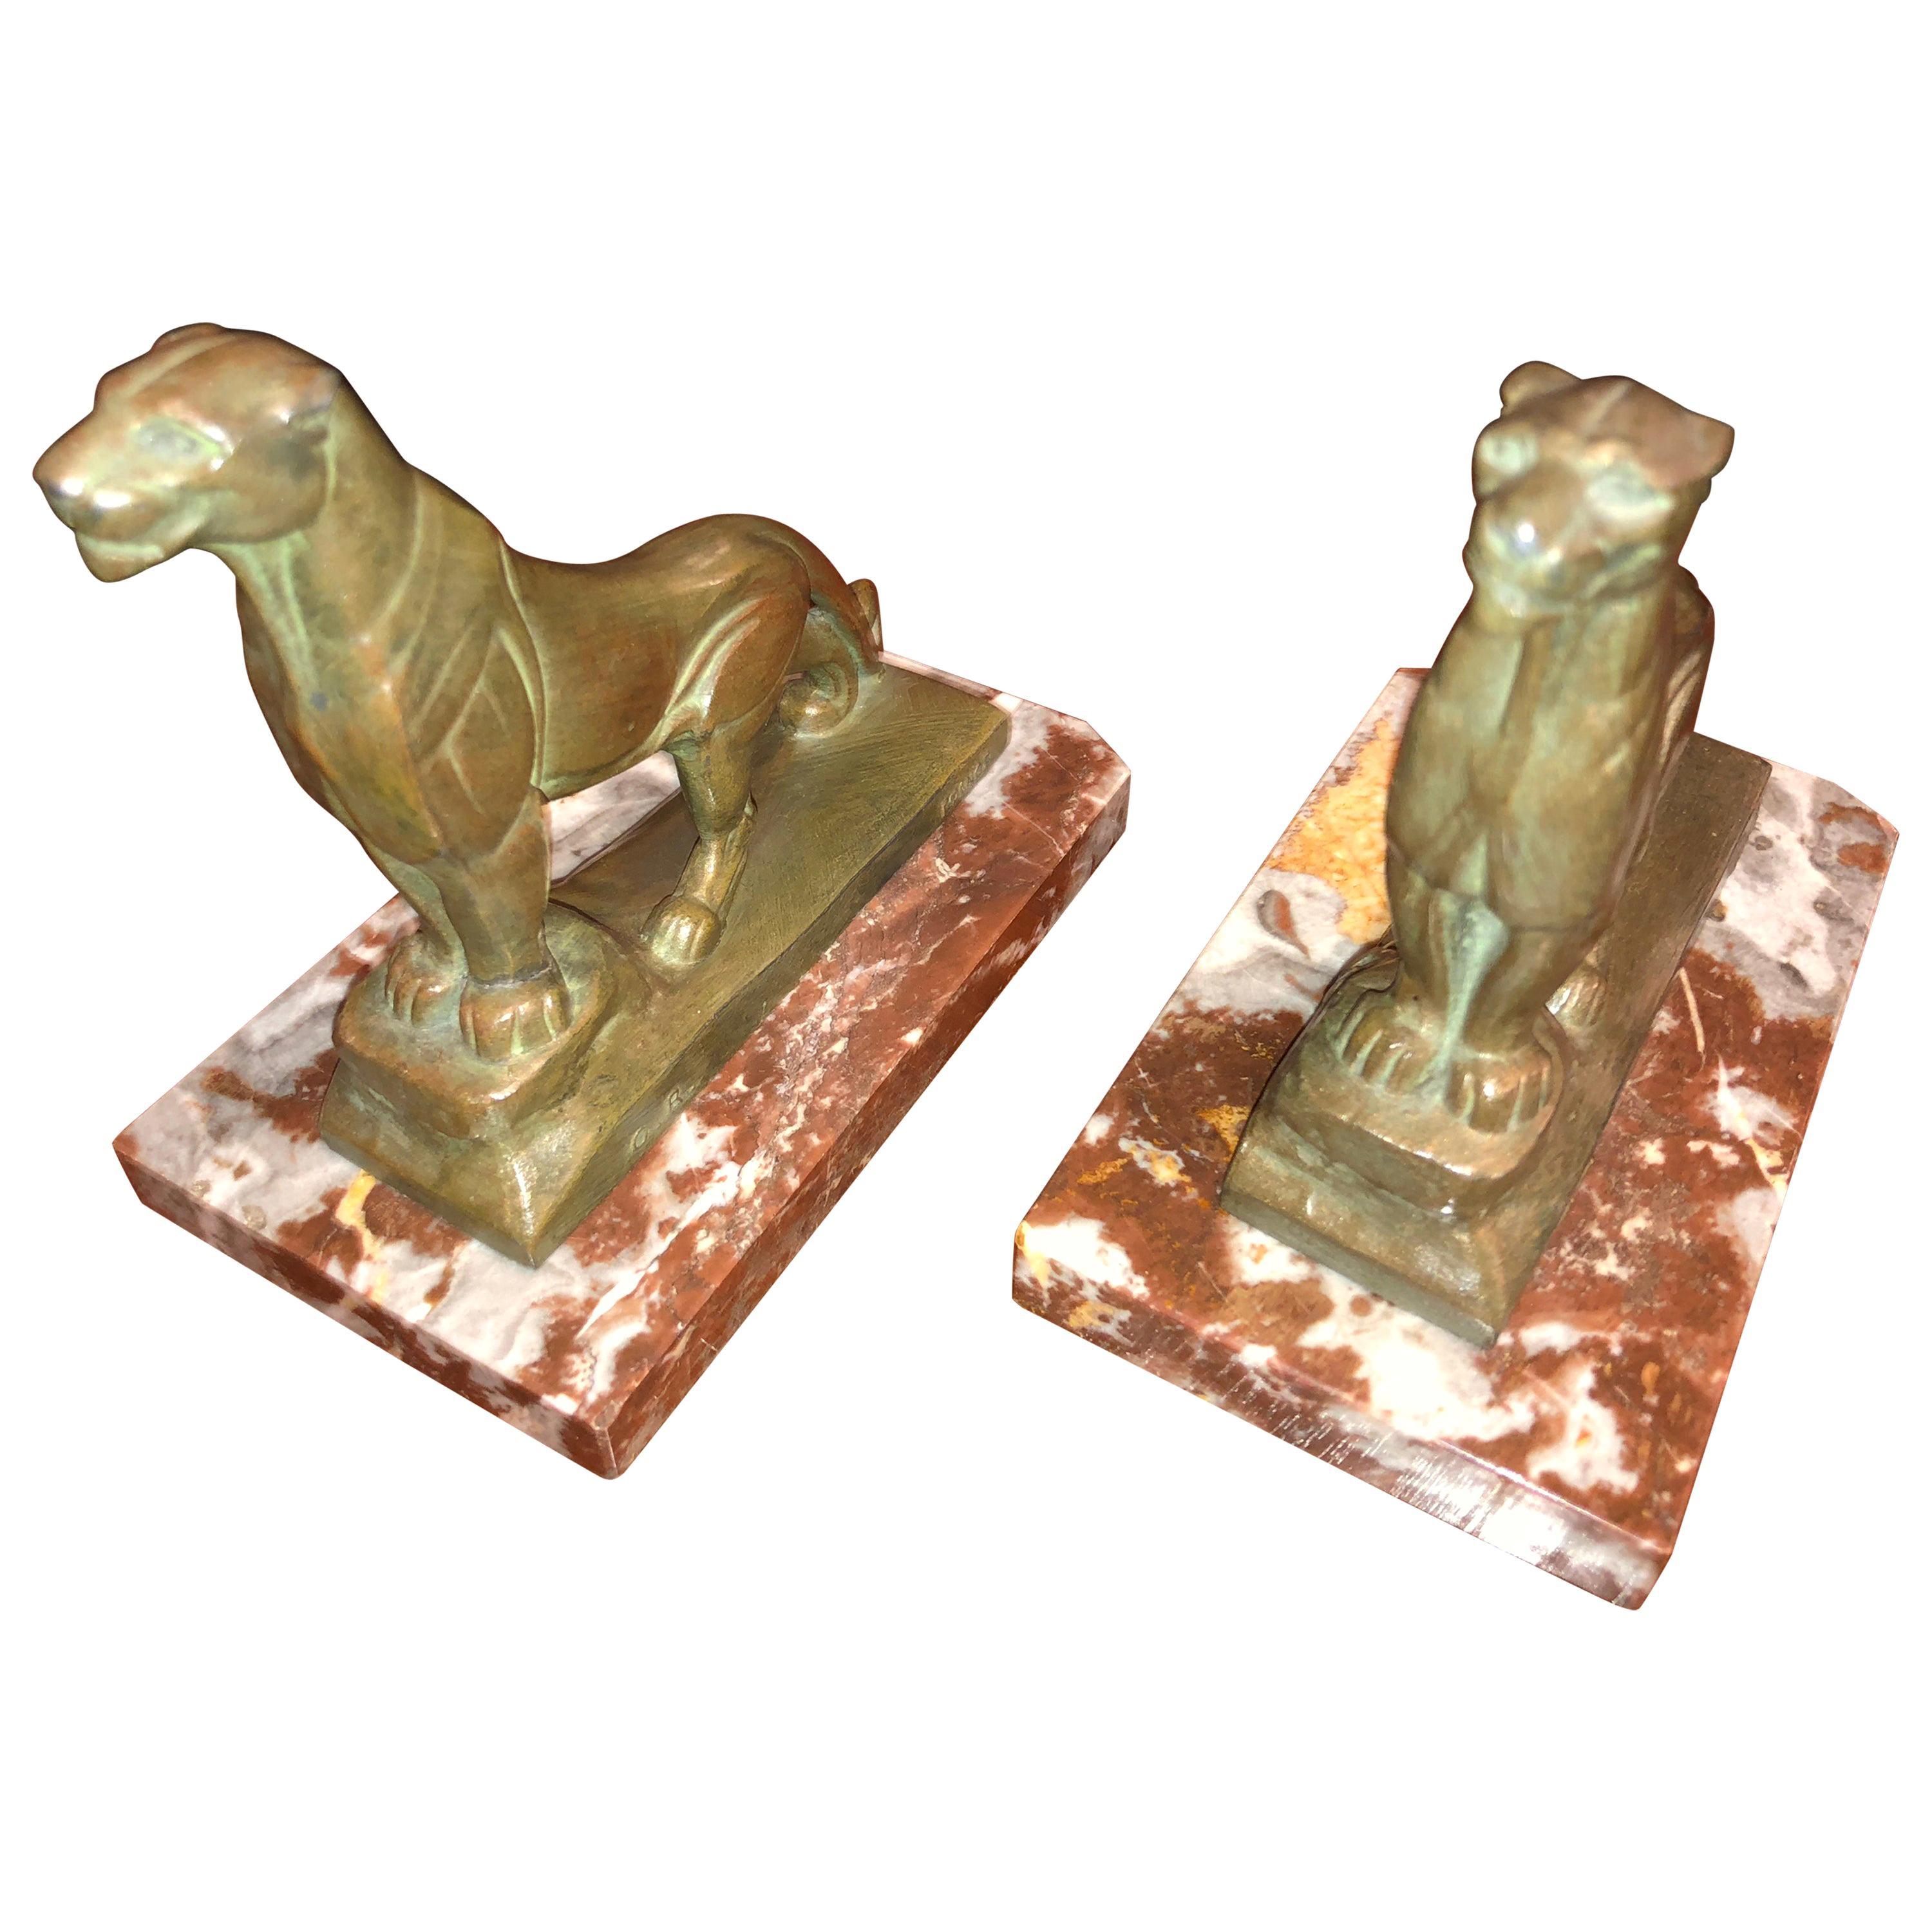 Art Deco leopard panther bookends by the French artist Frecourt on a marble base. Fine animal detailing work is signed on the metal with the artist's name, France, and initial C.R. The unusual red marble base is in excellent condition. She stood